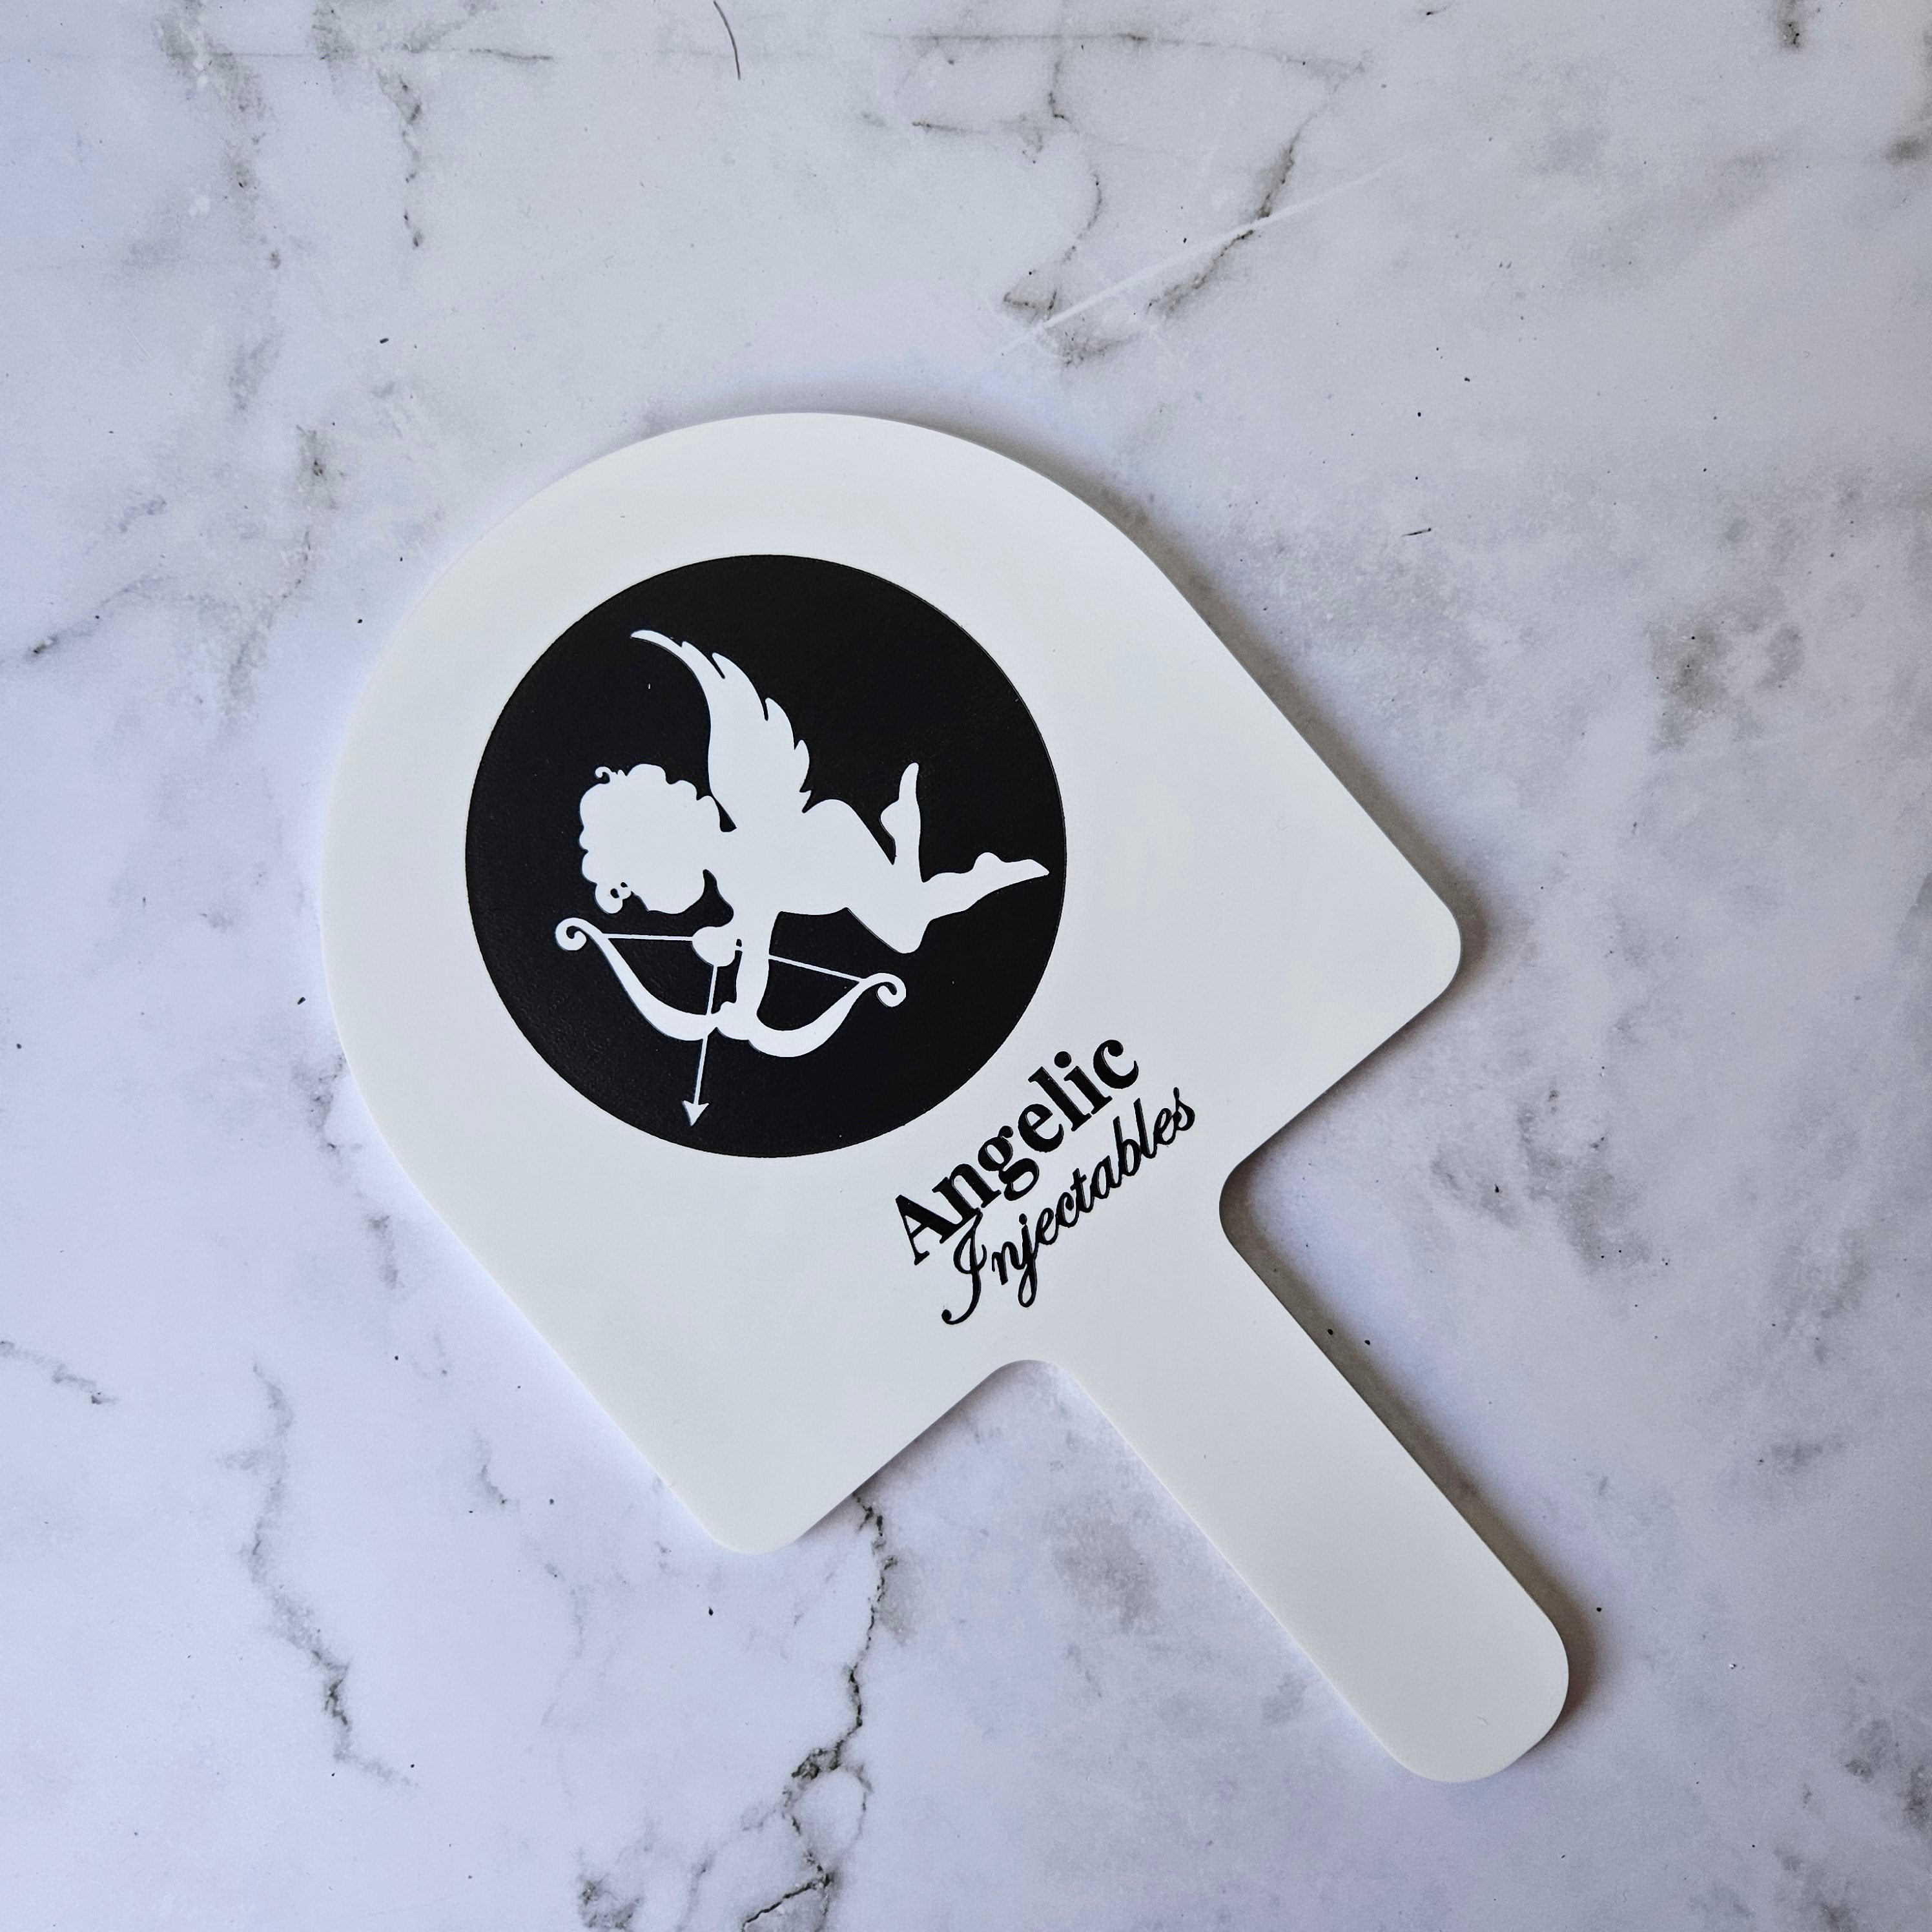 Custom Handheld Mirror with Logo for Injectable Clinic - Arch handheld mirror in white acrylic with black logo